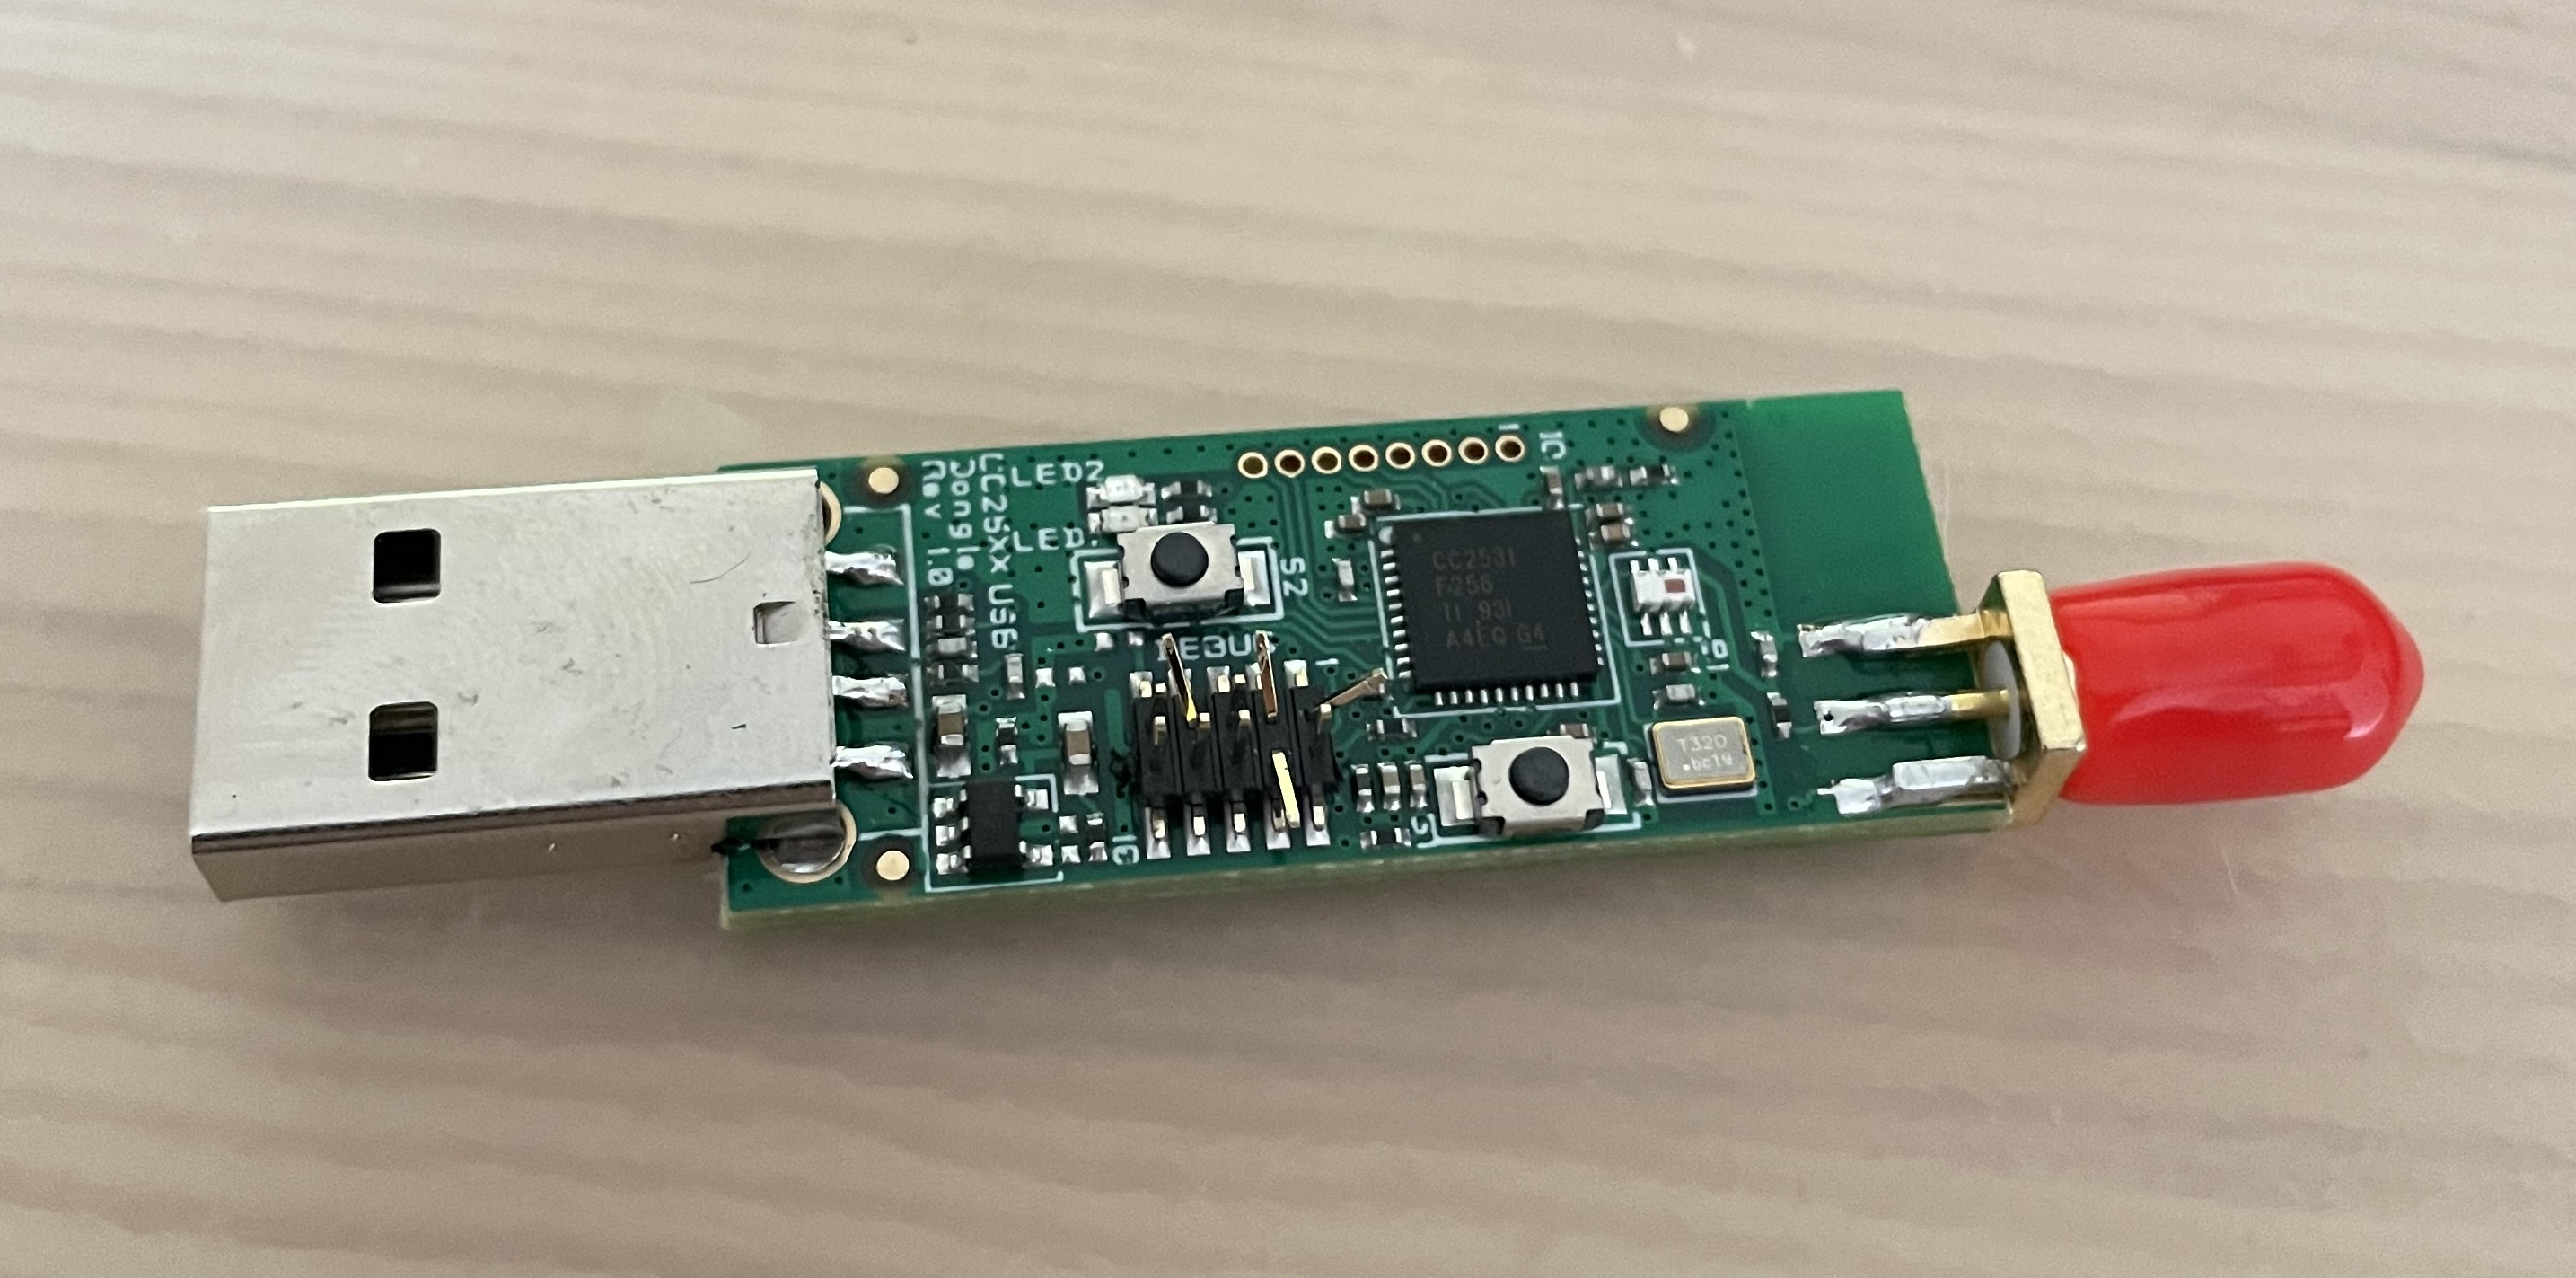 Photo showing the bent debug pins on the dongle